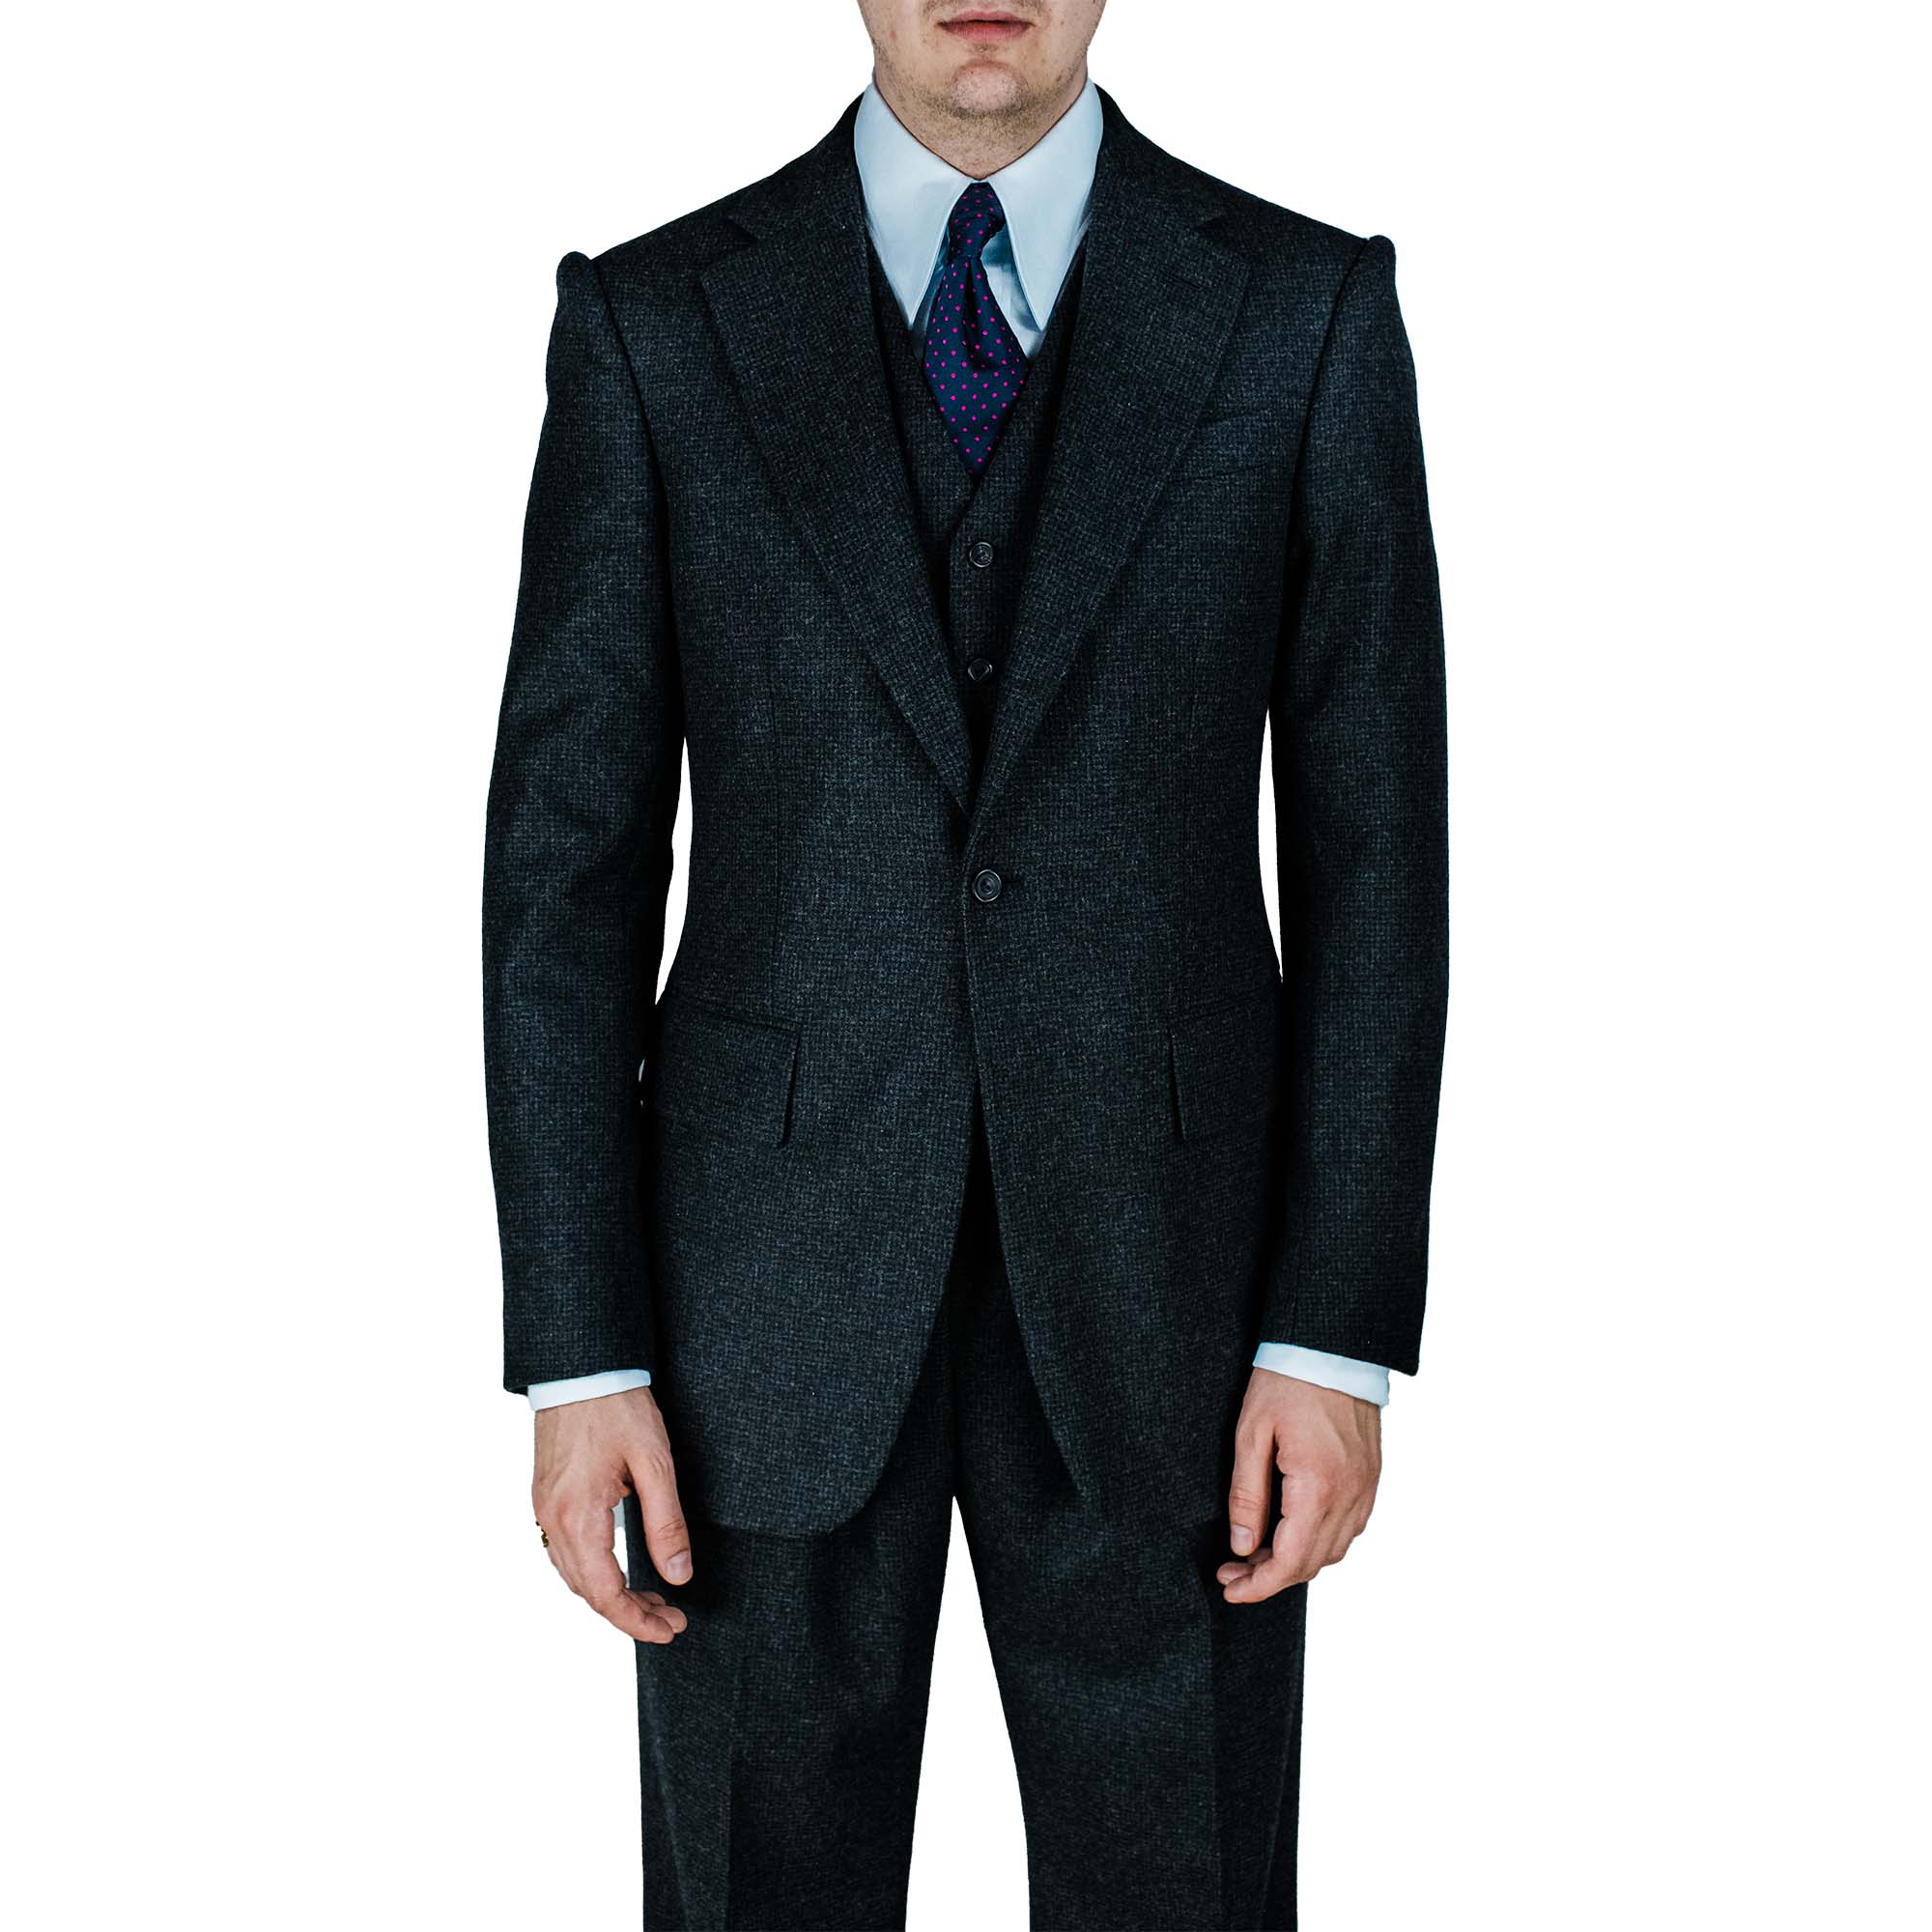 Suit - charcoal puppytooth flannel